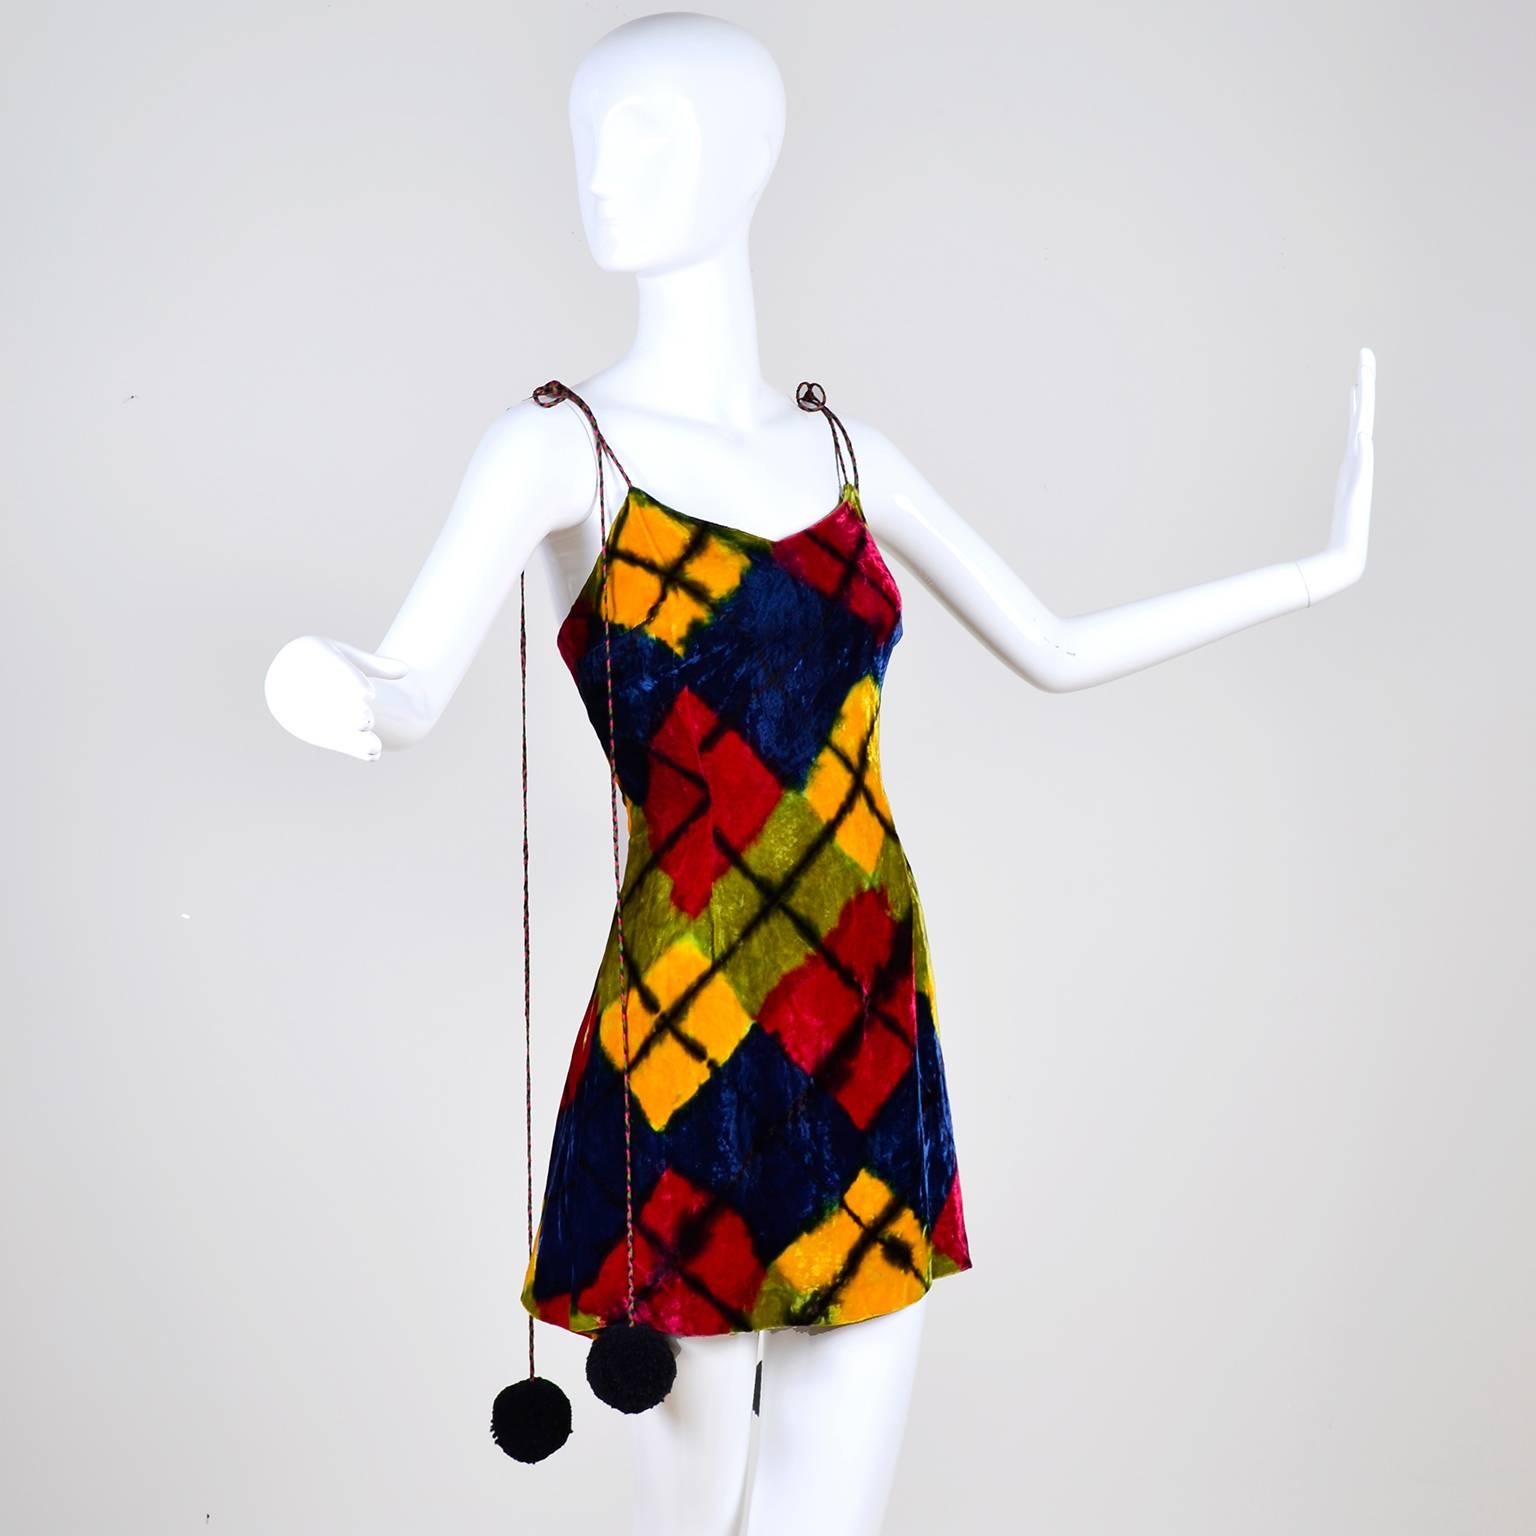 This fabulous vintage dress was designed by Todd Oldham for his 1994/95 Fall/Winter collection. The incredible dress is a harlequin or argyle printed rayon velvet with a back zipper. The dress is lined in a gorgeous tye dyed silk. The long ties can